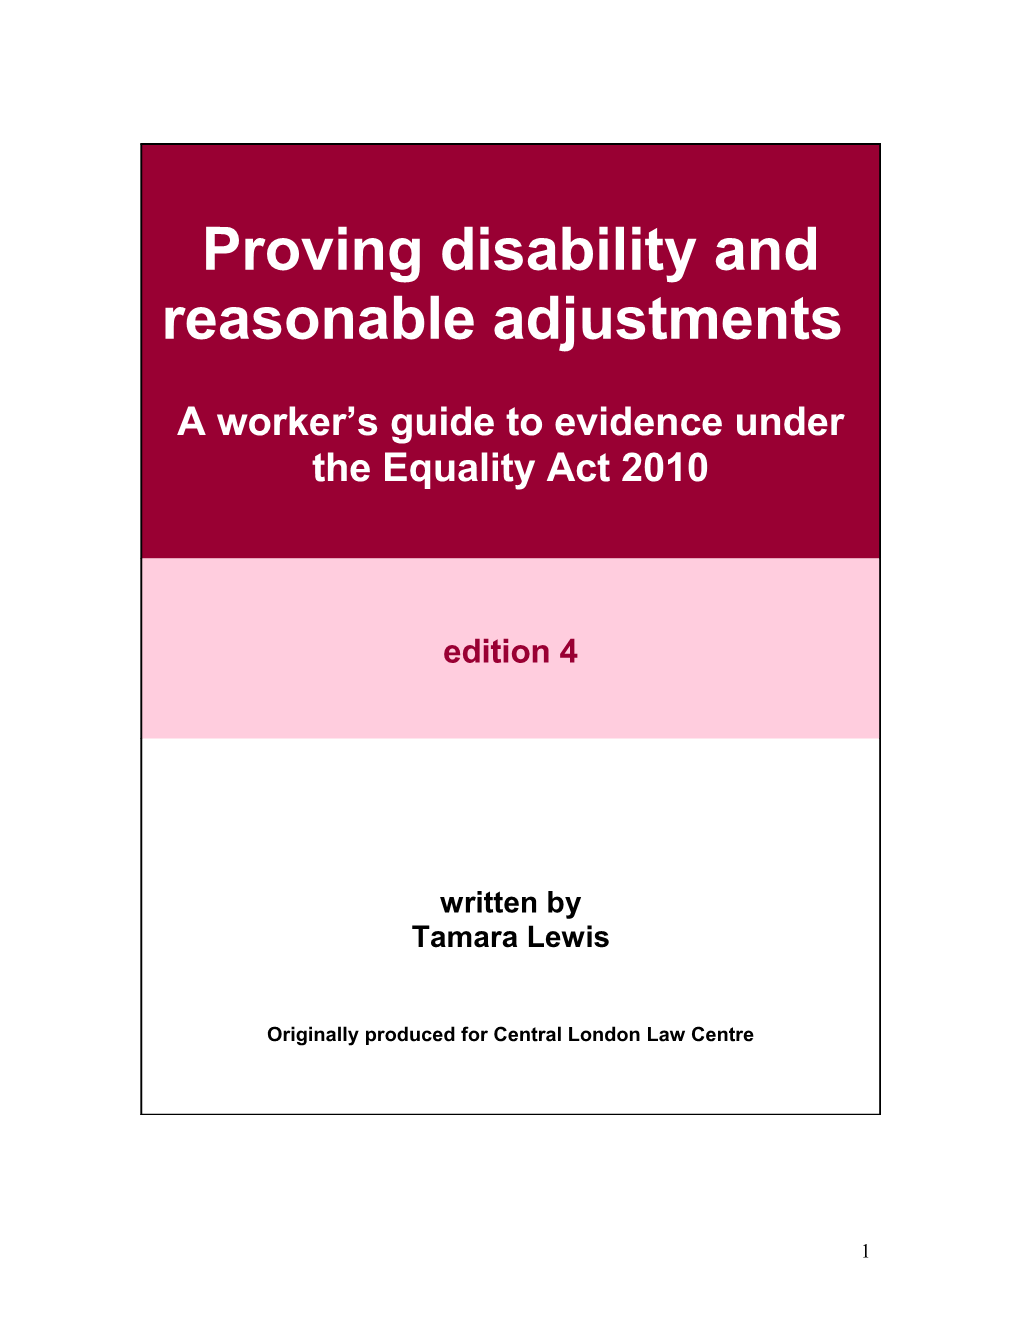 Proving Disability and Reasonable Adjustments